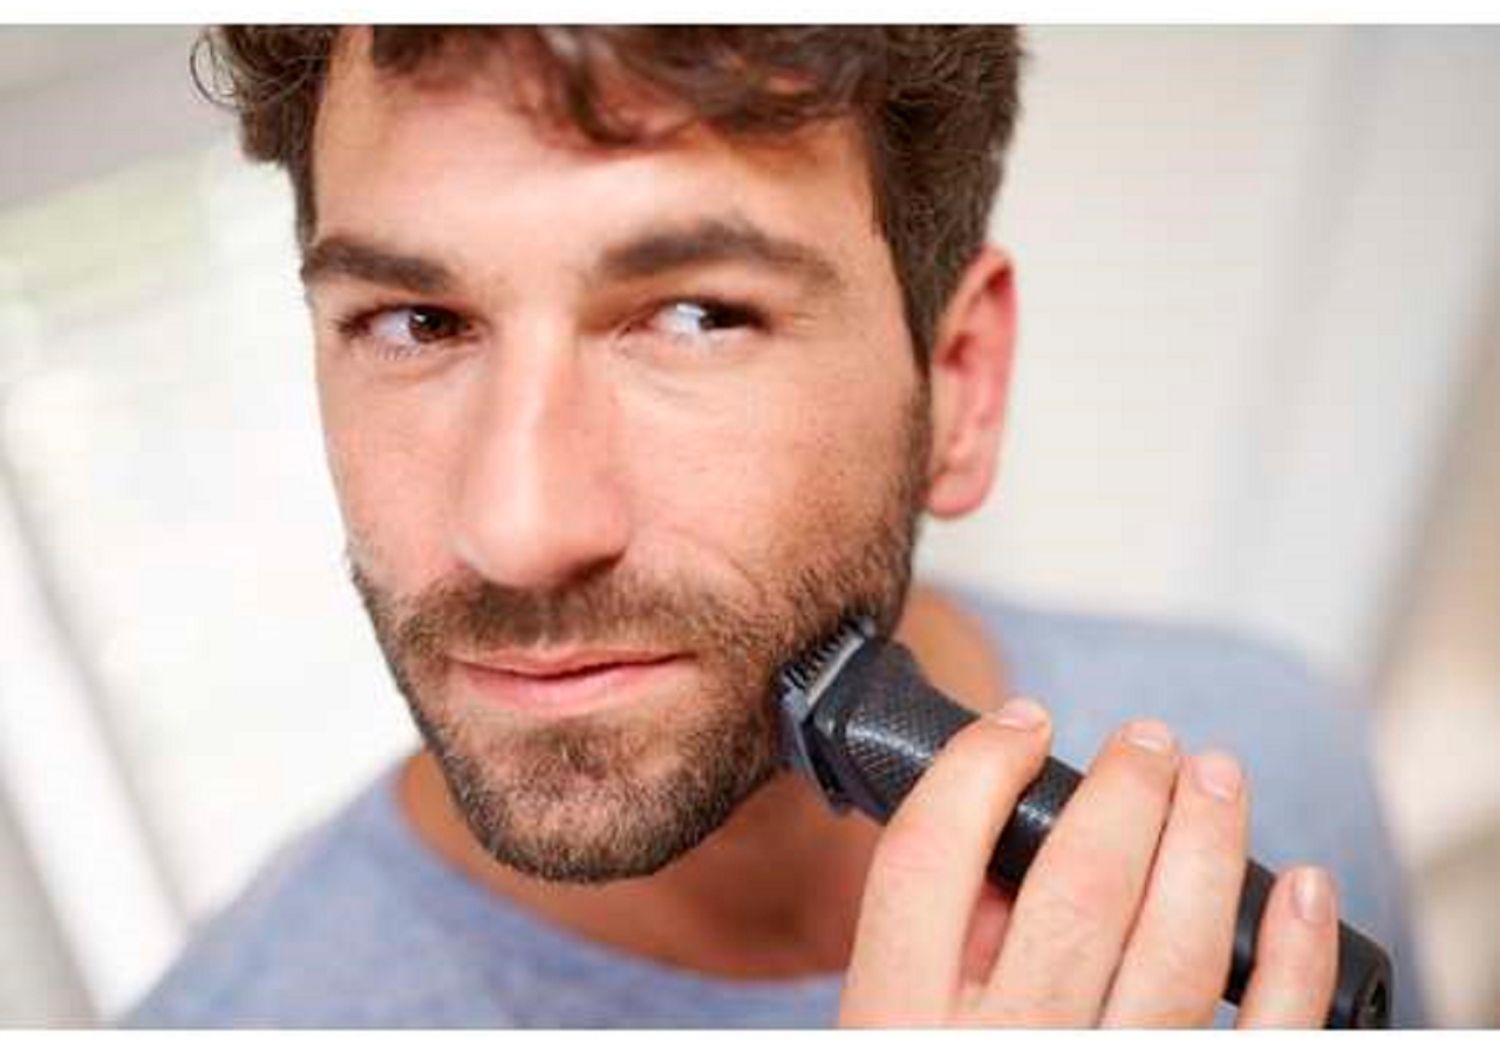 philips trimmer for haircut and beard